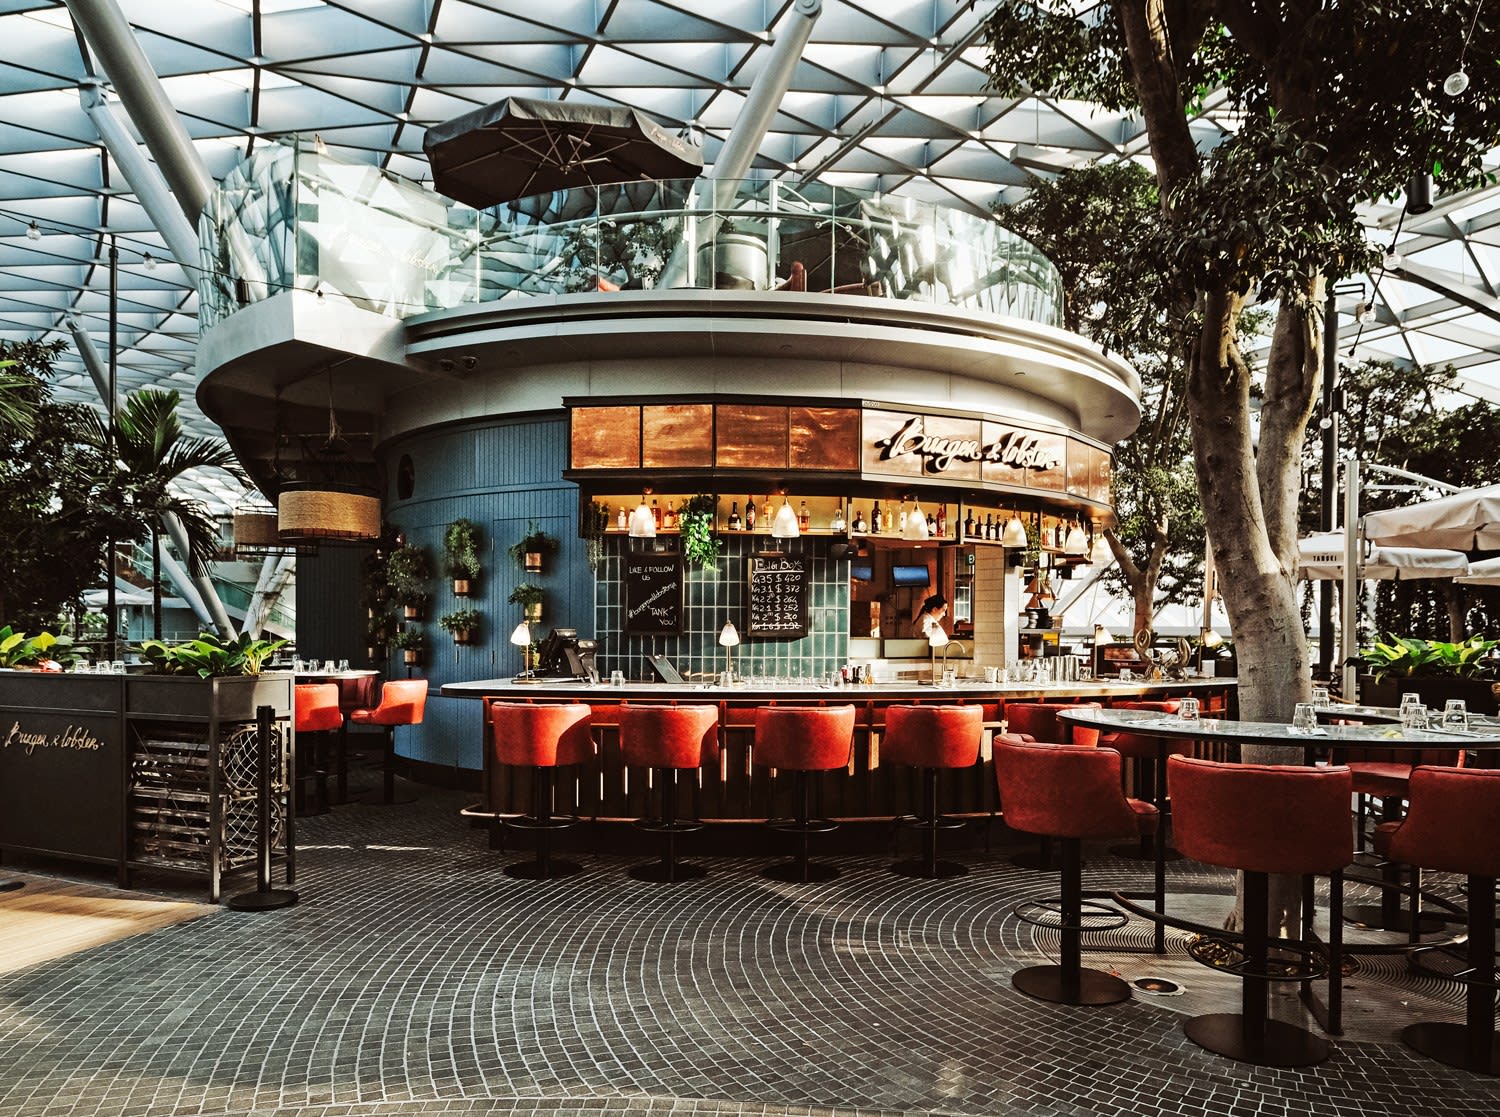 The Burger & Lobster restaurant outlet located at Jewel Changi Airport.